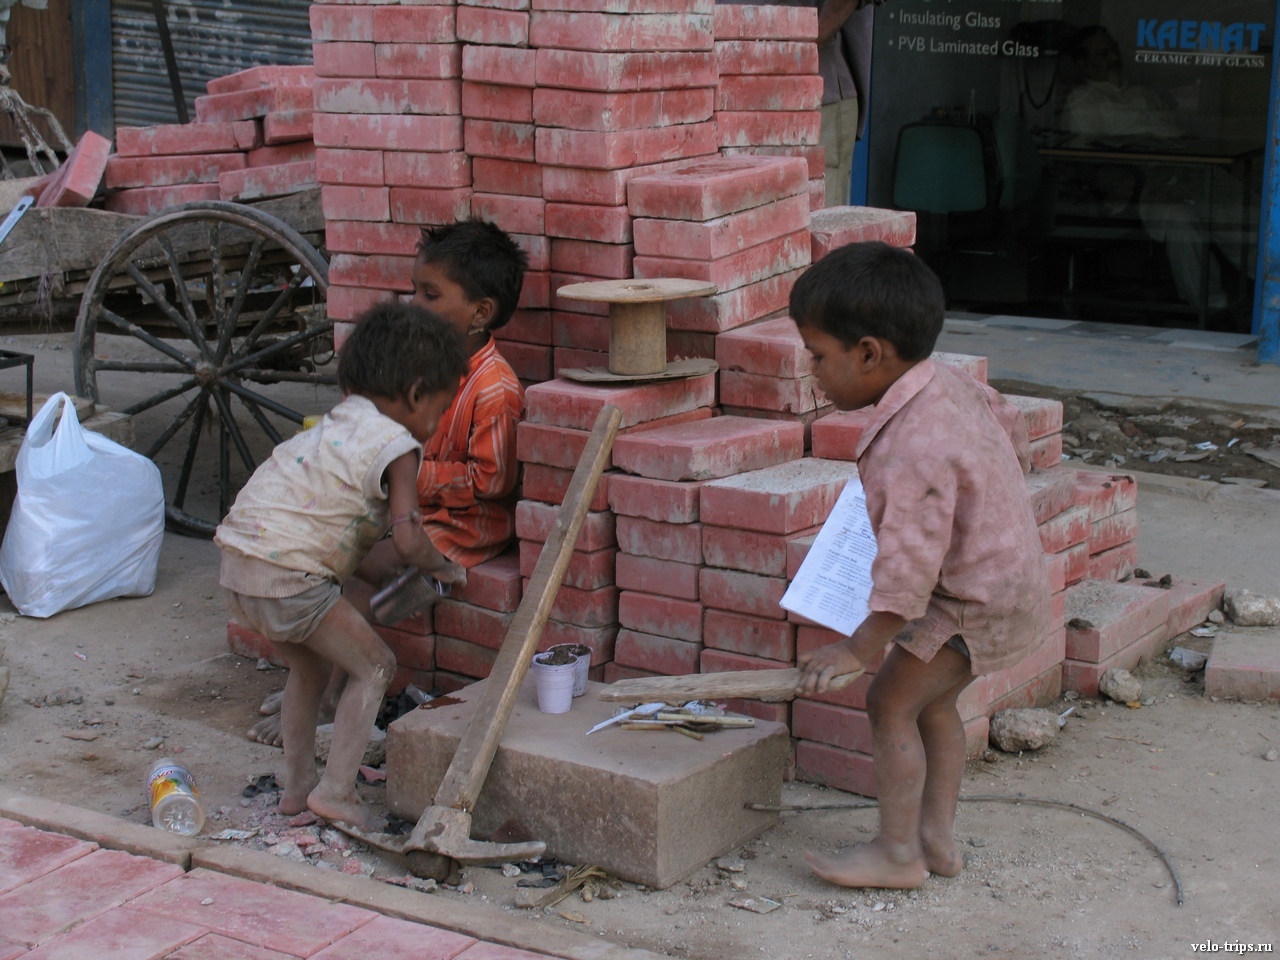 Children playing on Delhi streets, India